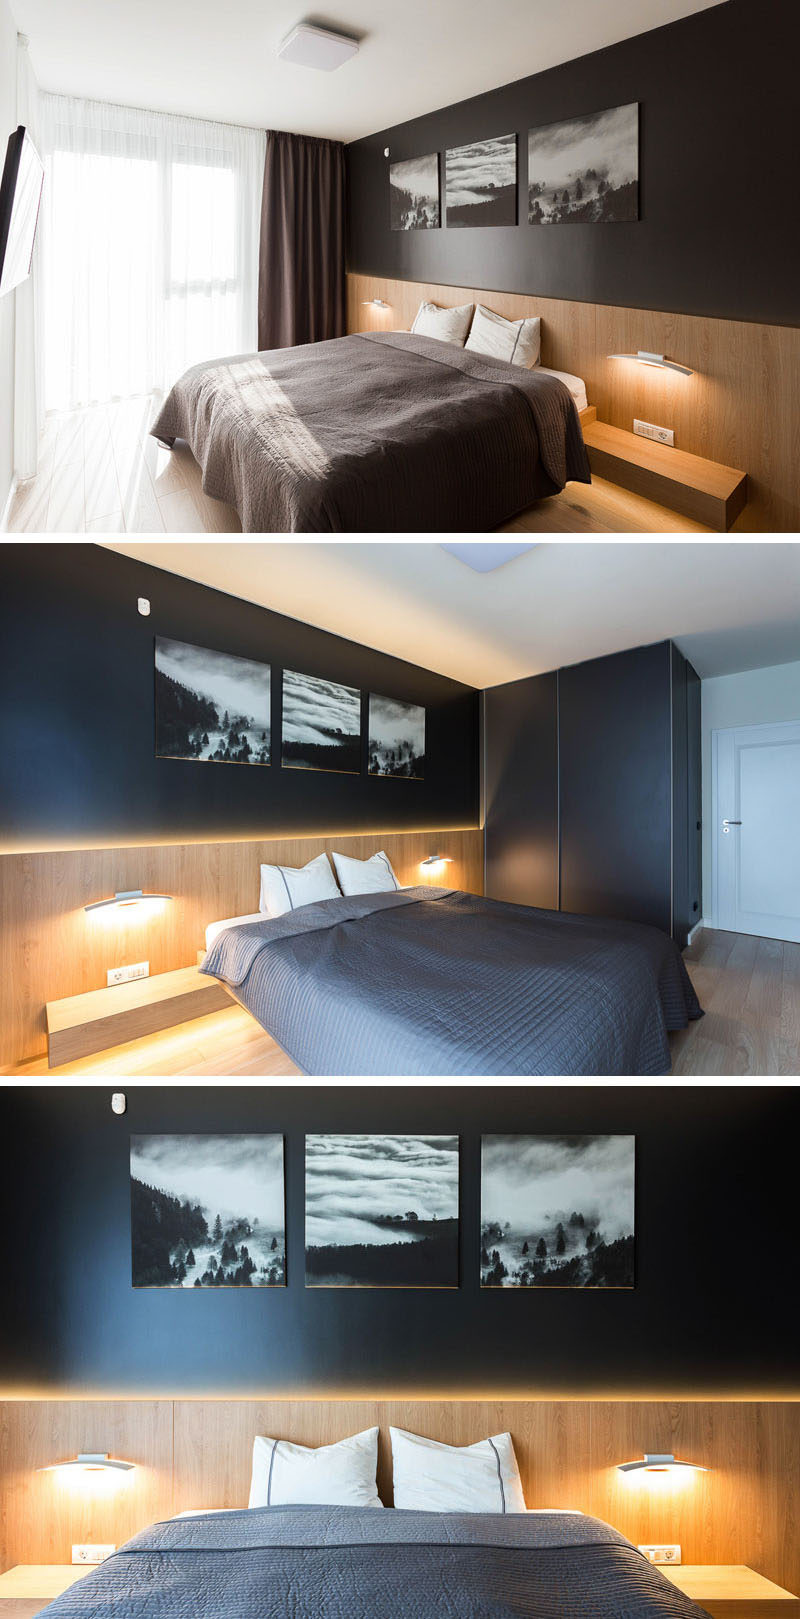 In this modern bedroom, a black wall has black and white photography as art work, while wood runs along the bottom half of the wall and creates a headboard for the bed. Hidden lighting and bedside lighting create a soft ambient lighting for the room. #ModernBedroom #BlackWall #WoodHeadboard